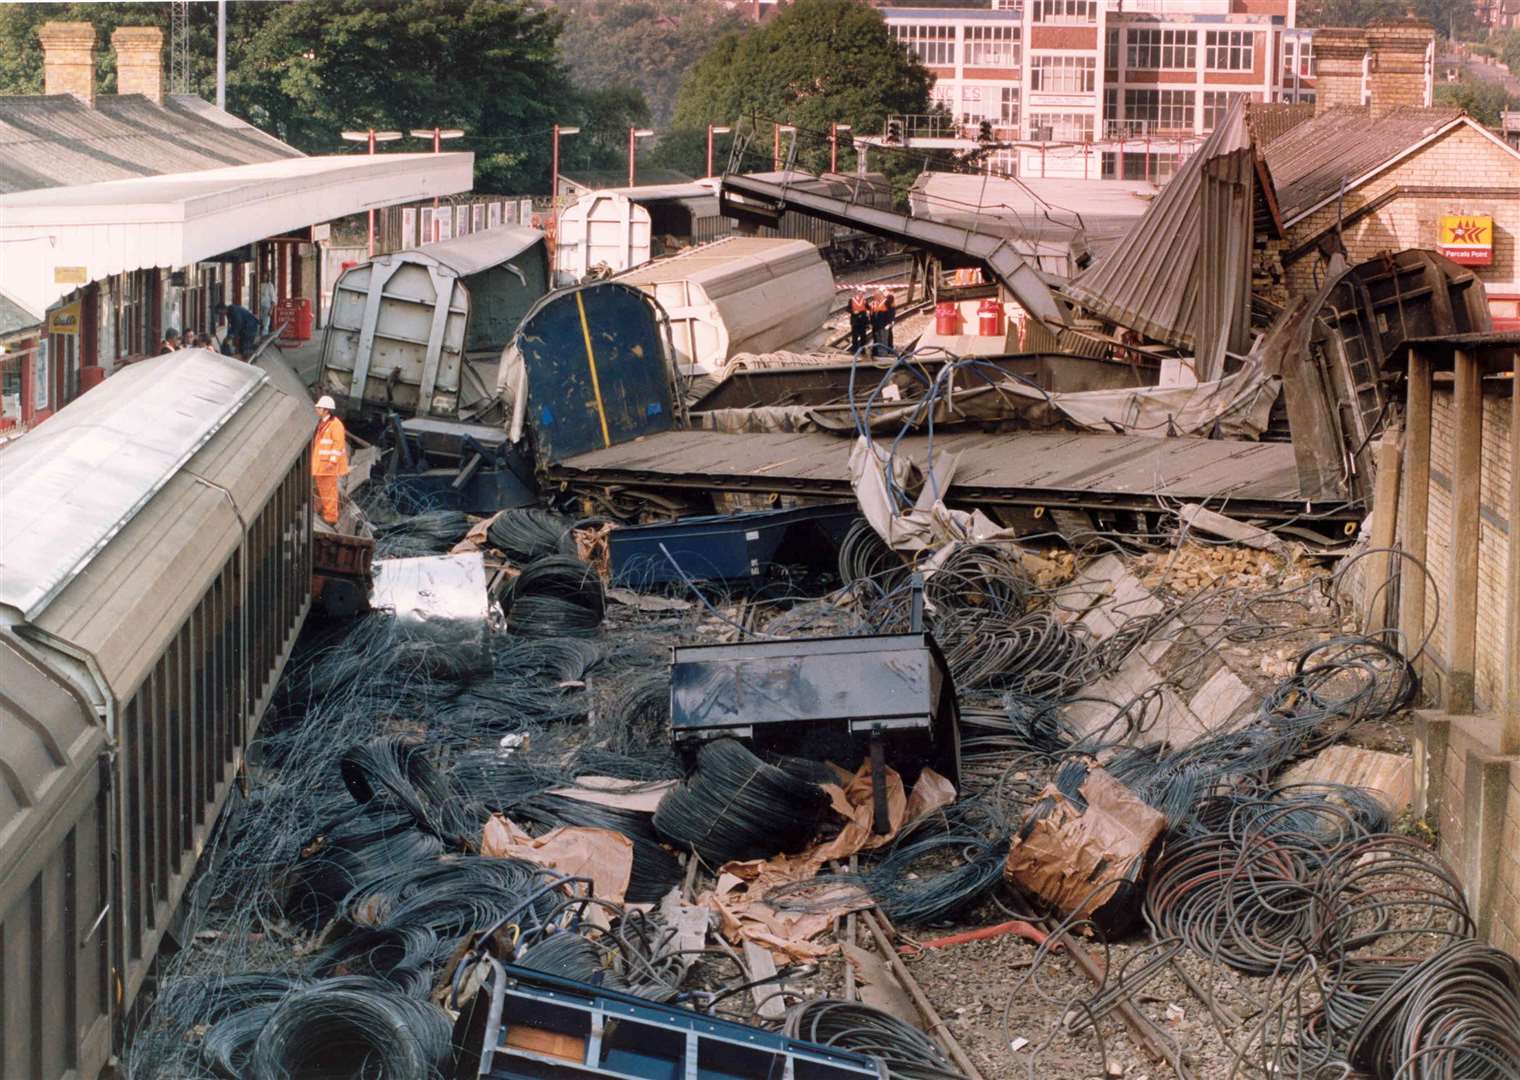 A freight train demolished Maidstone East station in 1993